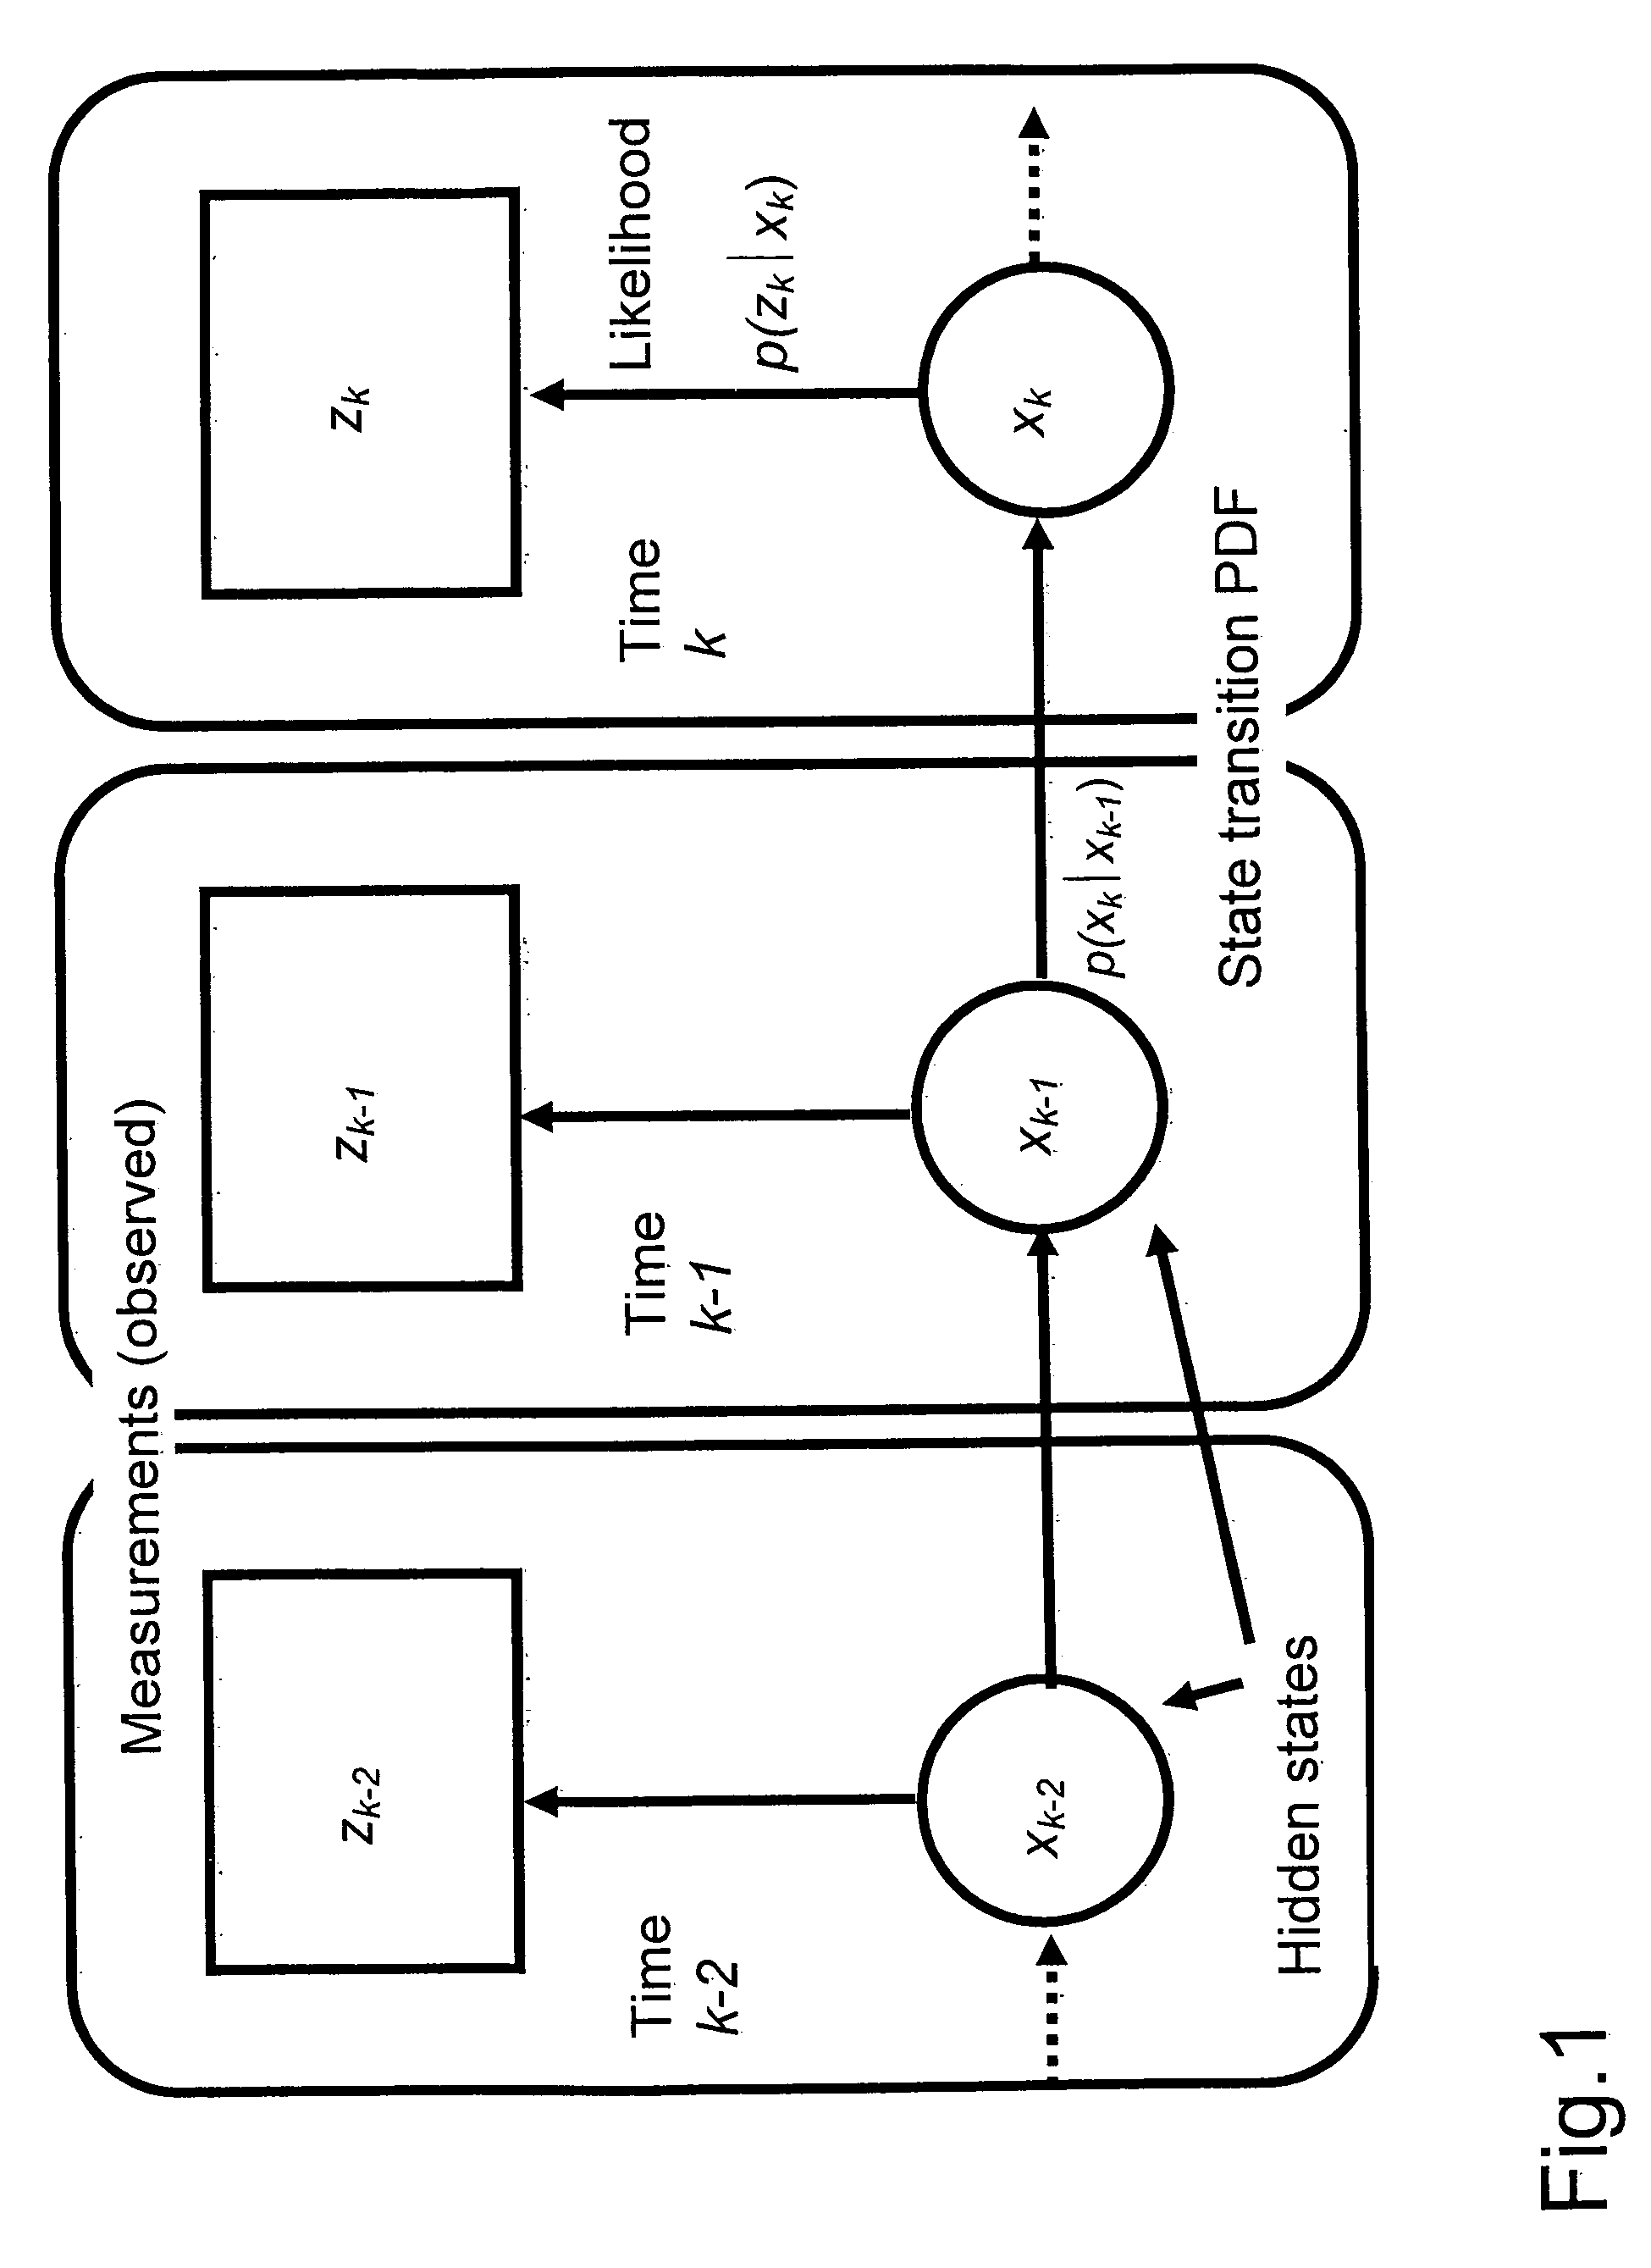 Method for estimating hidden channel parameters of a received GNNS navigation signal